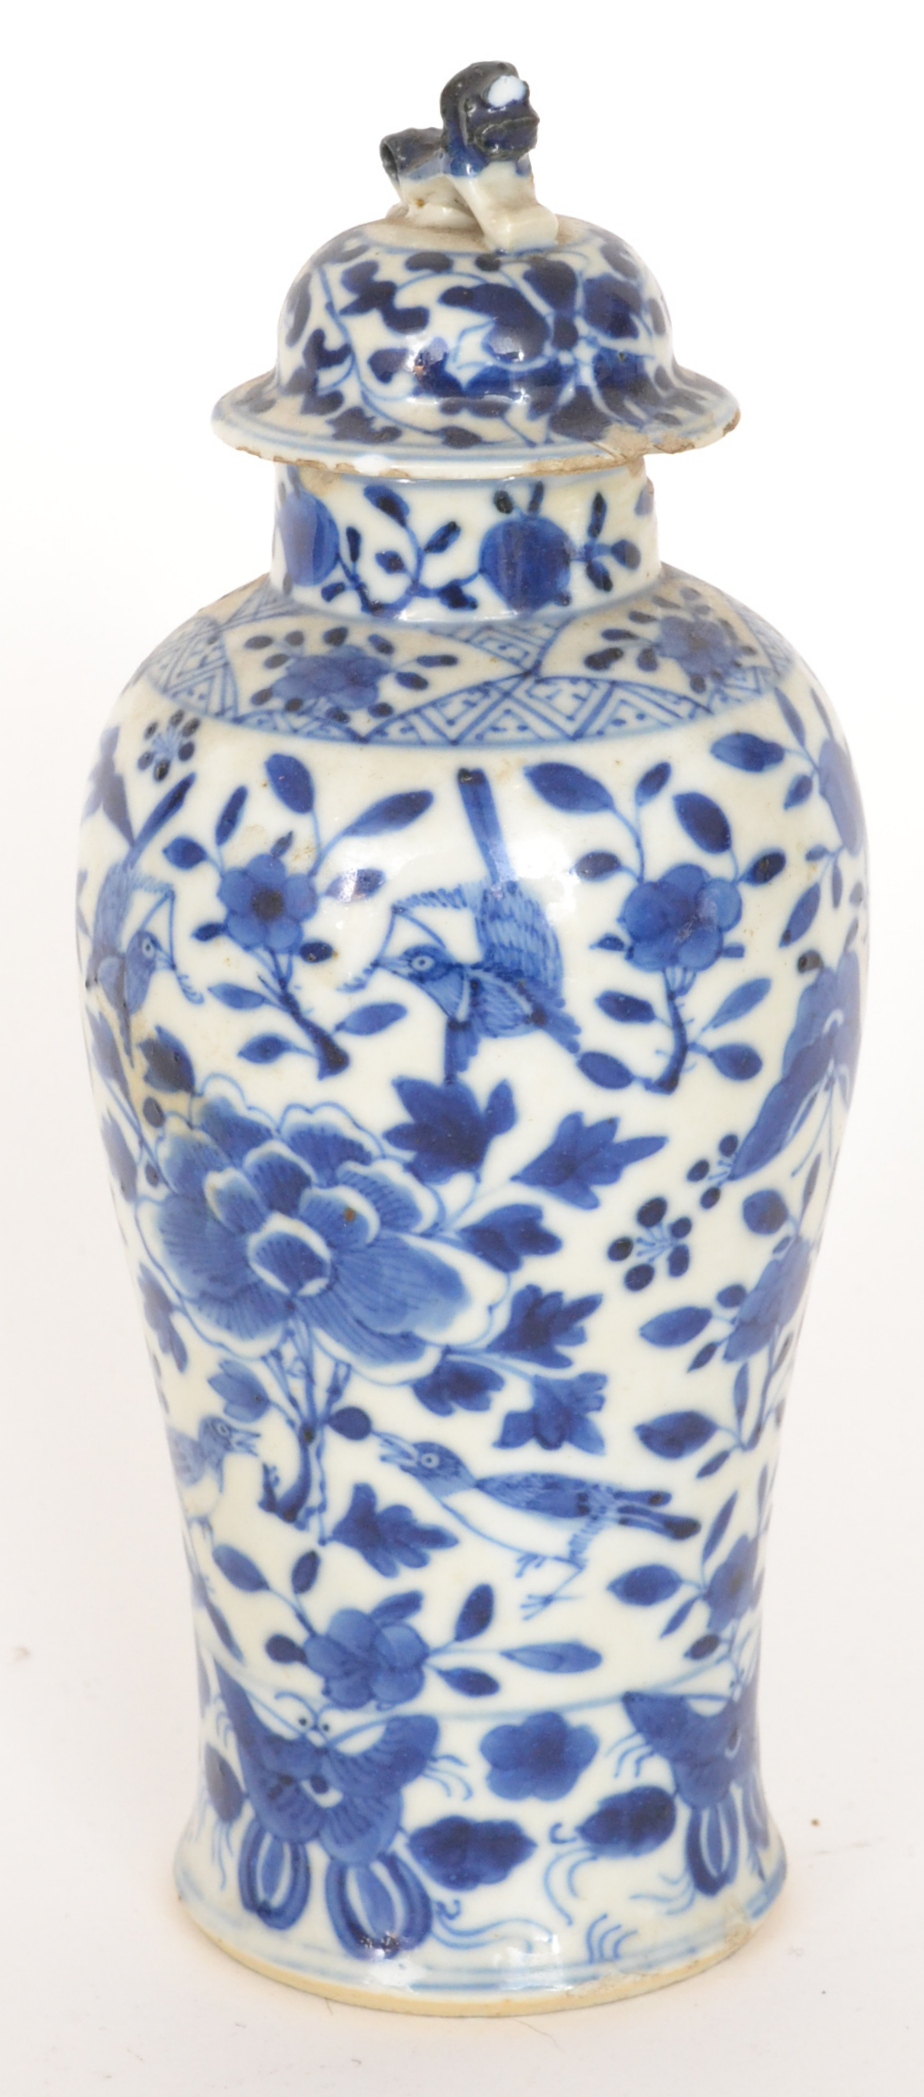 A late 19th to early 20th Century Chinese blue and white vase and cover, the body decorated with